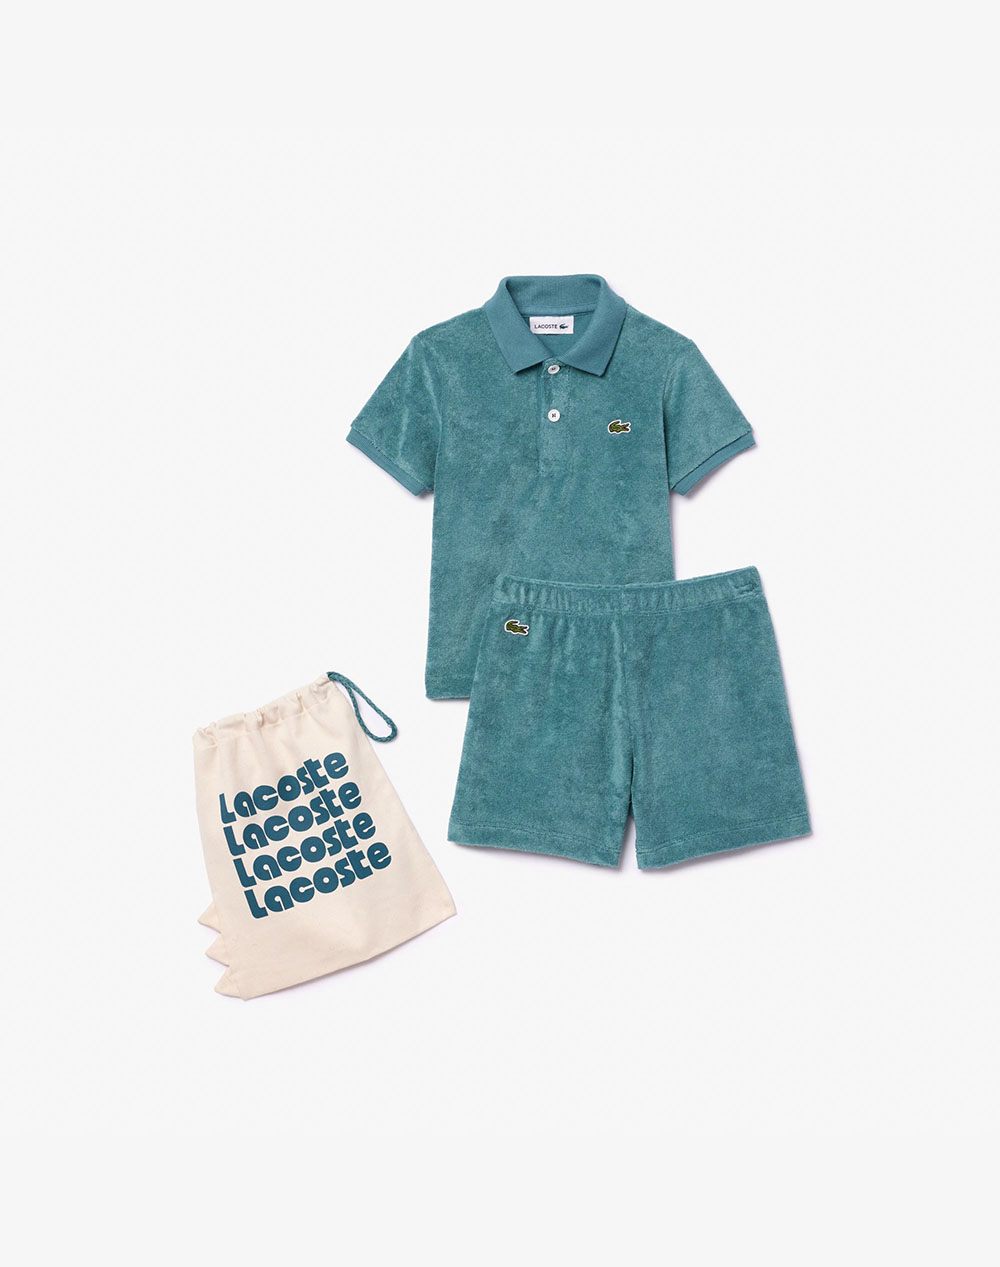 LACOSTE ΒΡΕΦΙΚΟ ΣΕΤ ΔΩΡΟΥ CHILDREN GIFT OUTFIT 34J9368-IY4 Petrol 3832BLACO4400006_XR28754